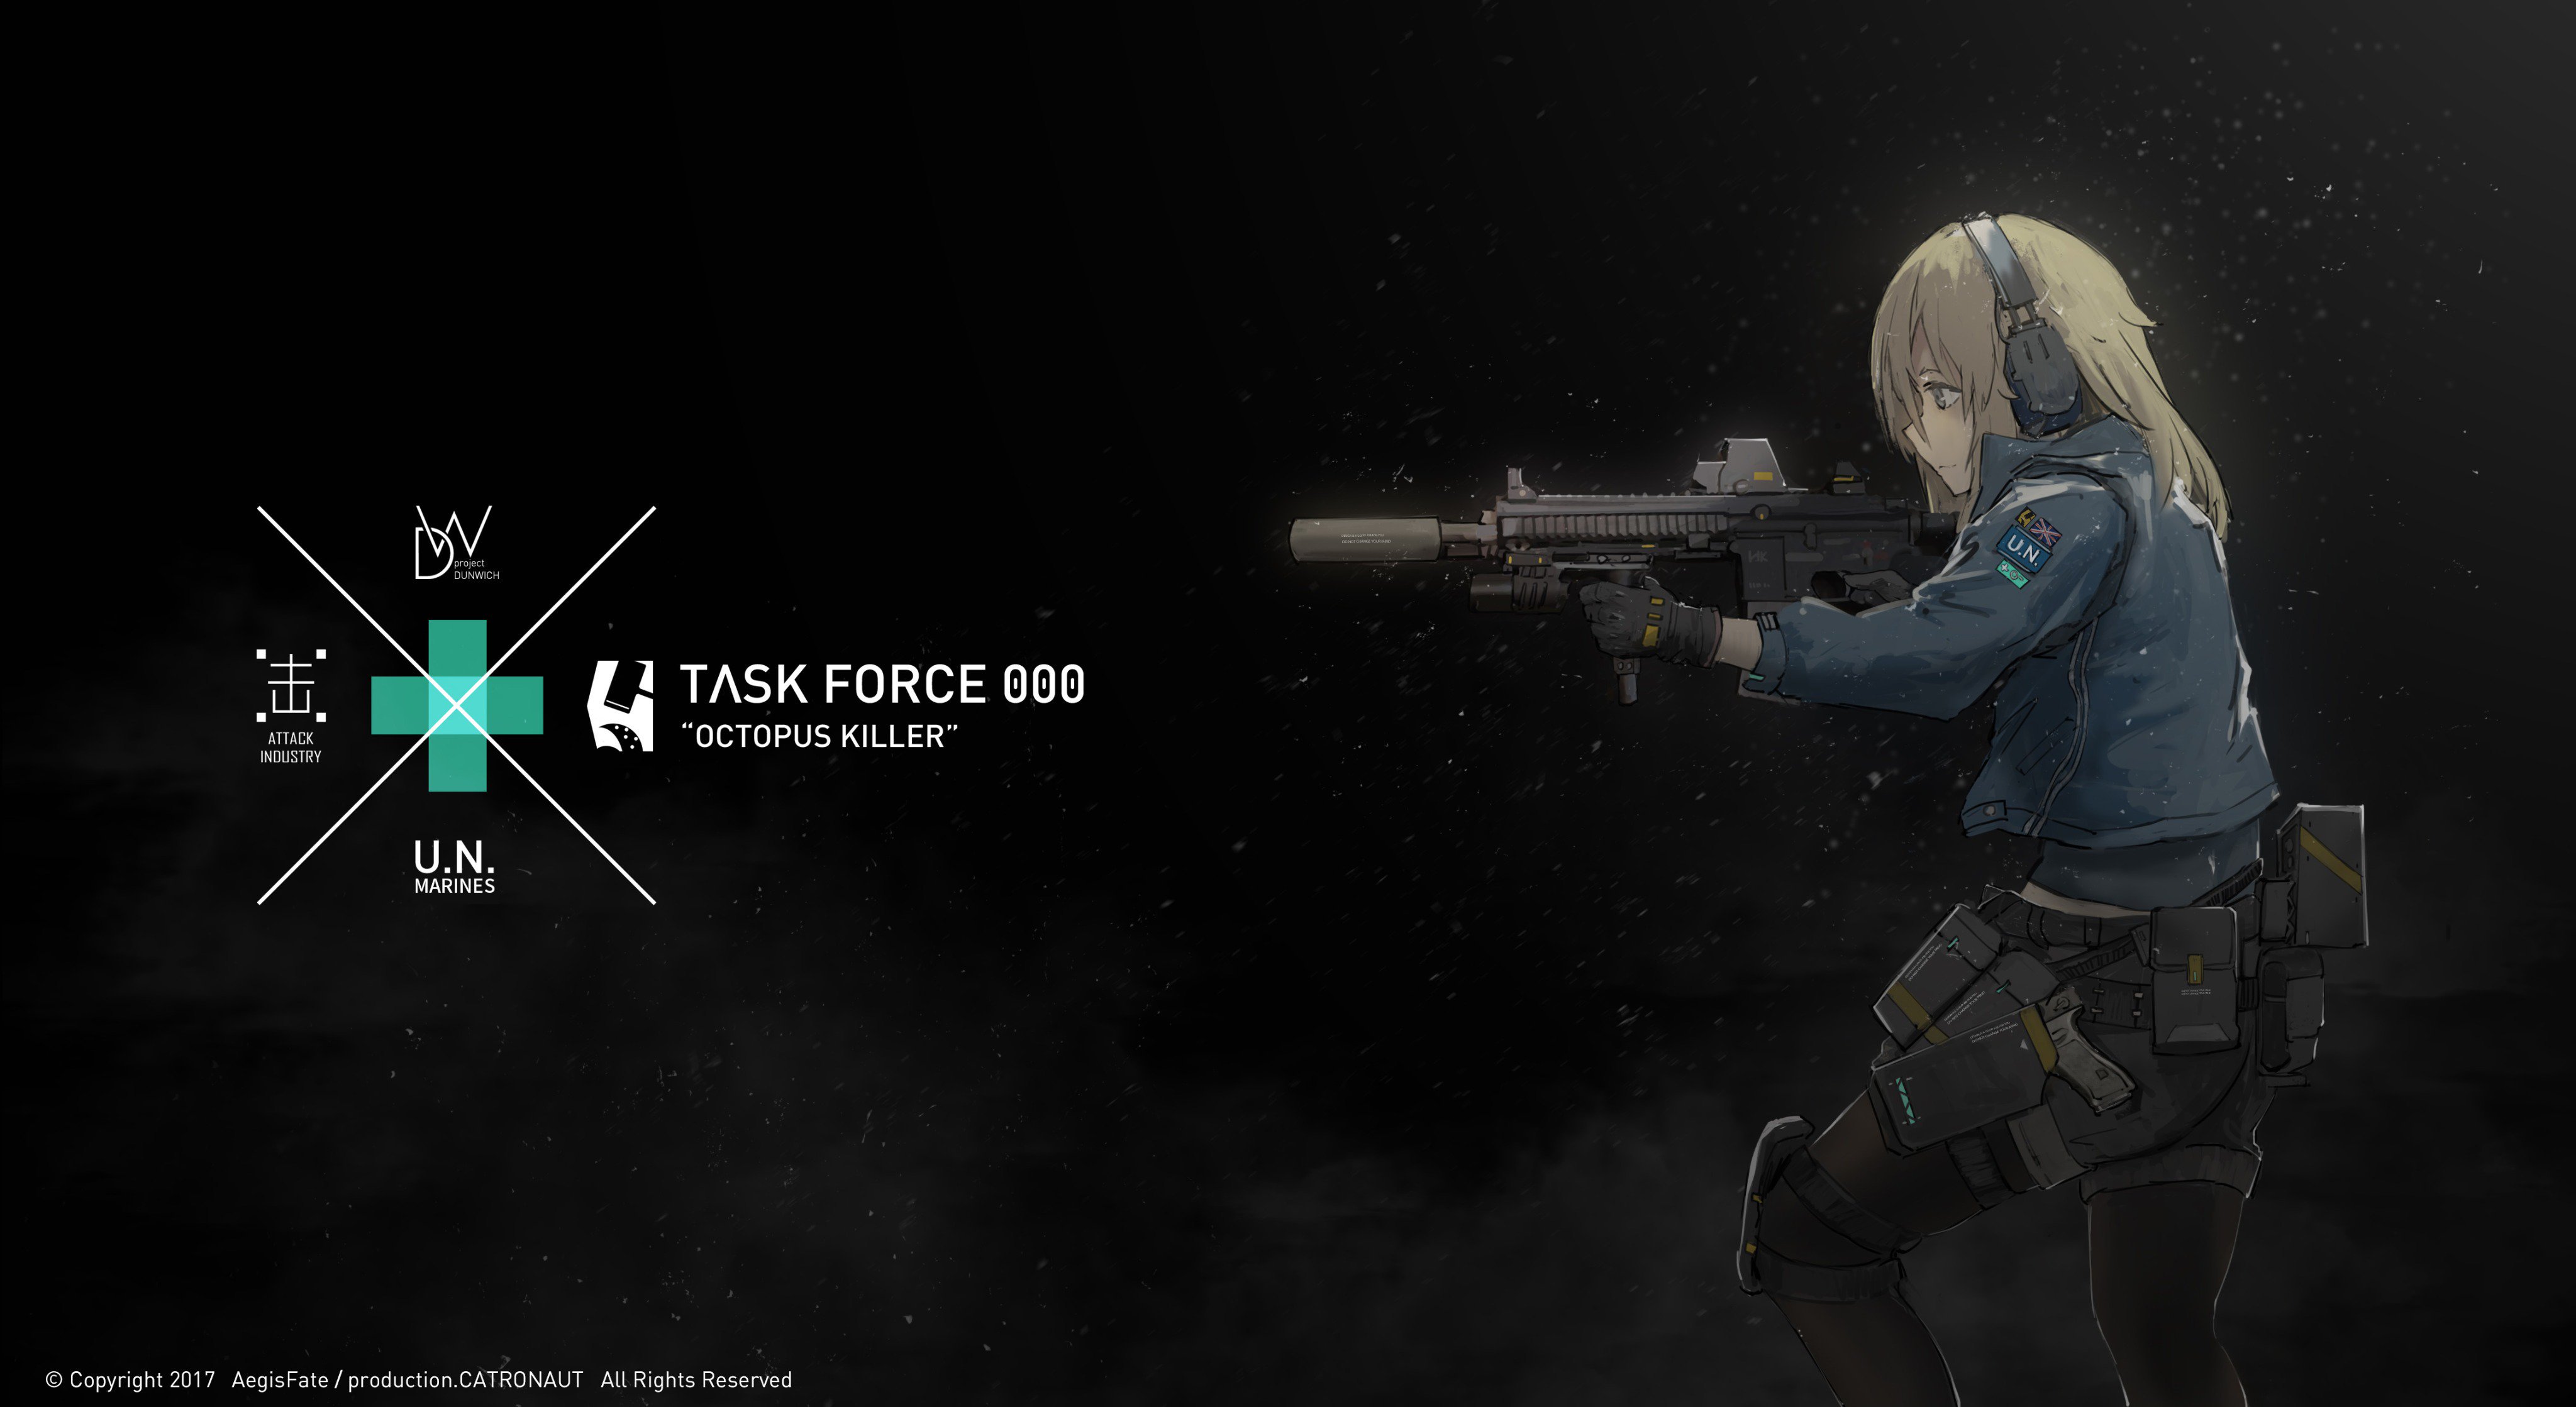 Anime Anime Girls AegisFate Girl With Weapon Weapon 2017 Year Blonde 4096x2238